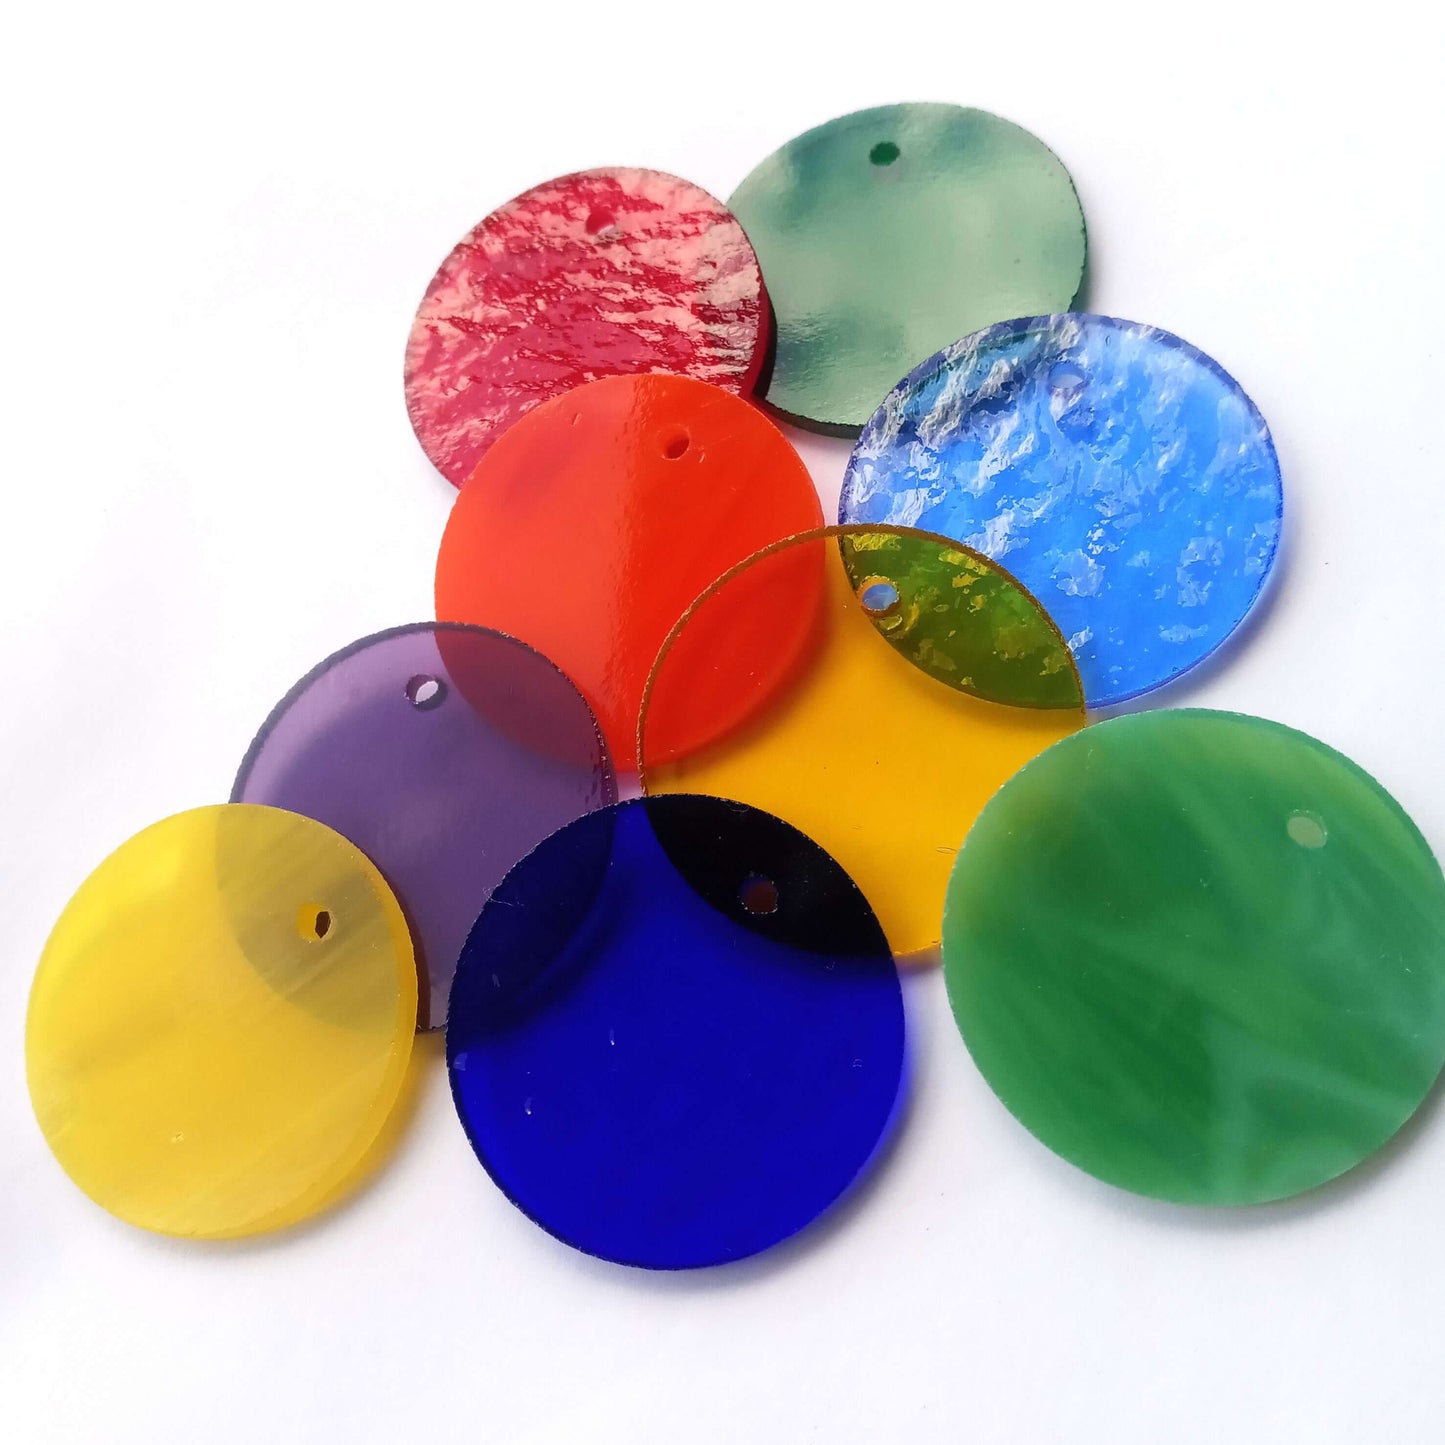 Precut Stained Glass Circles with Holes Drilled for Hanging, 1.5" Glass Circles for Windchimes, Glass Art, Assorted Colors, All Translucent and Wispy Stained Glass